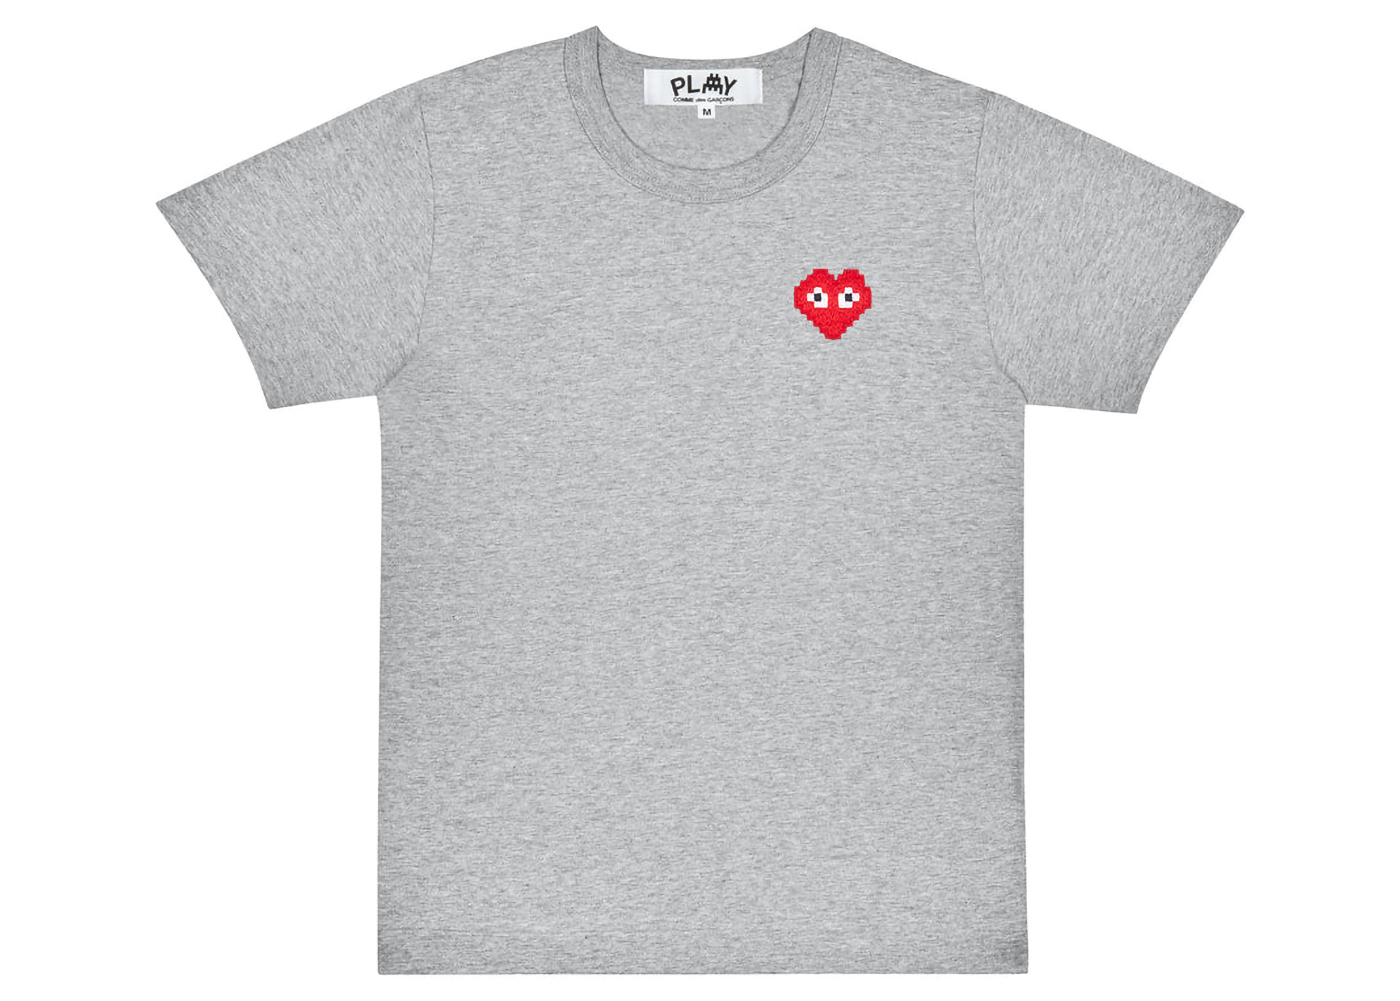 Comme des Garcons Play x Invader Women's T-Shirt Top Grey - FW22